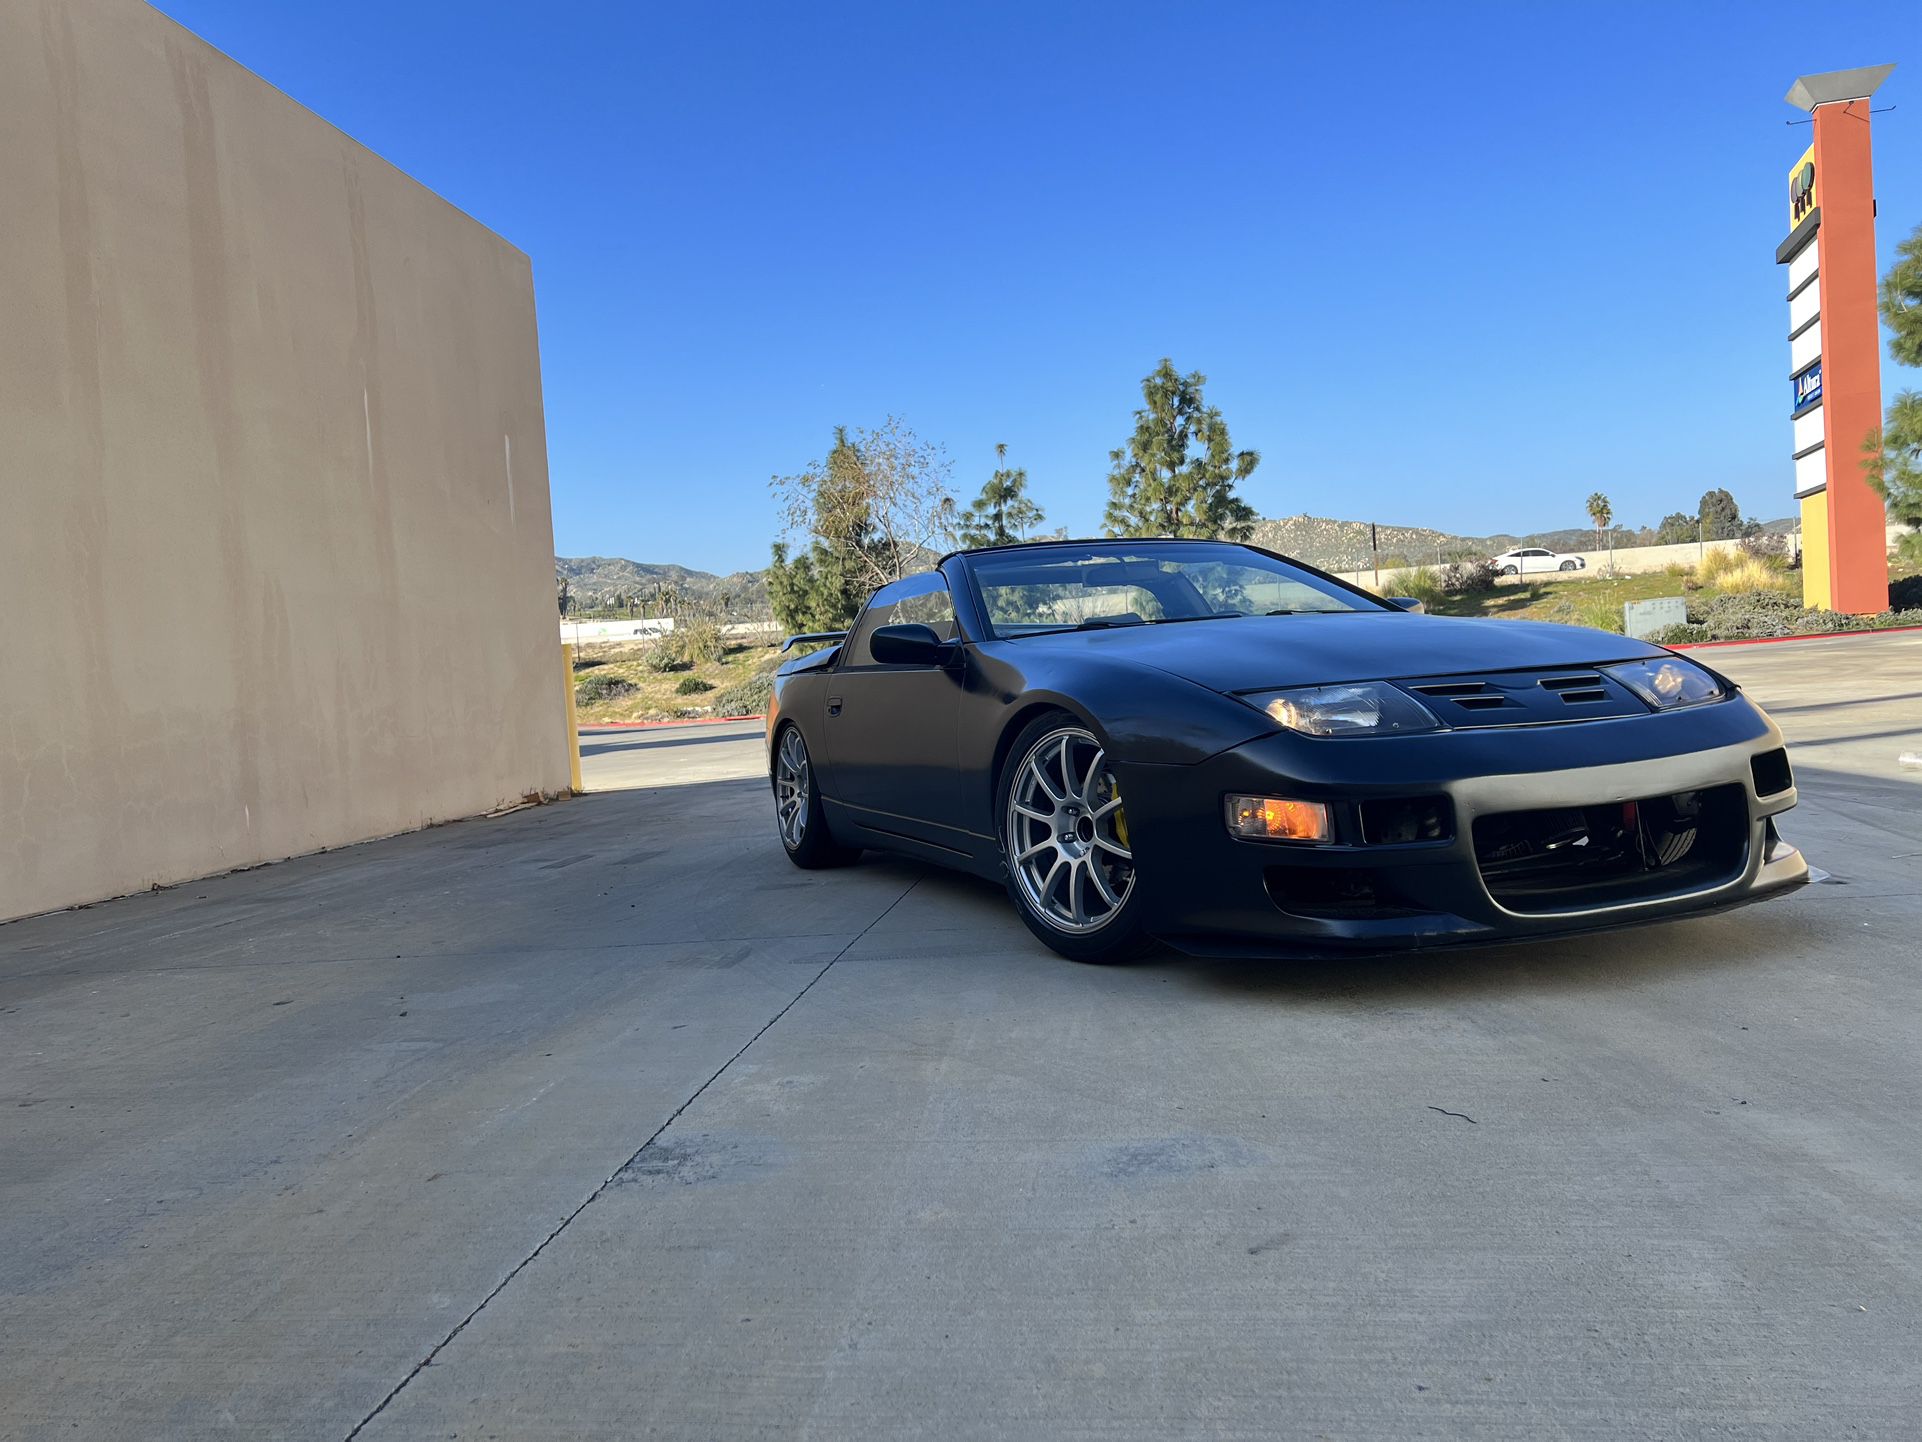 300zx Convertible for Sale in Moreno Valley, CA - OfferUp